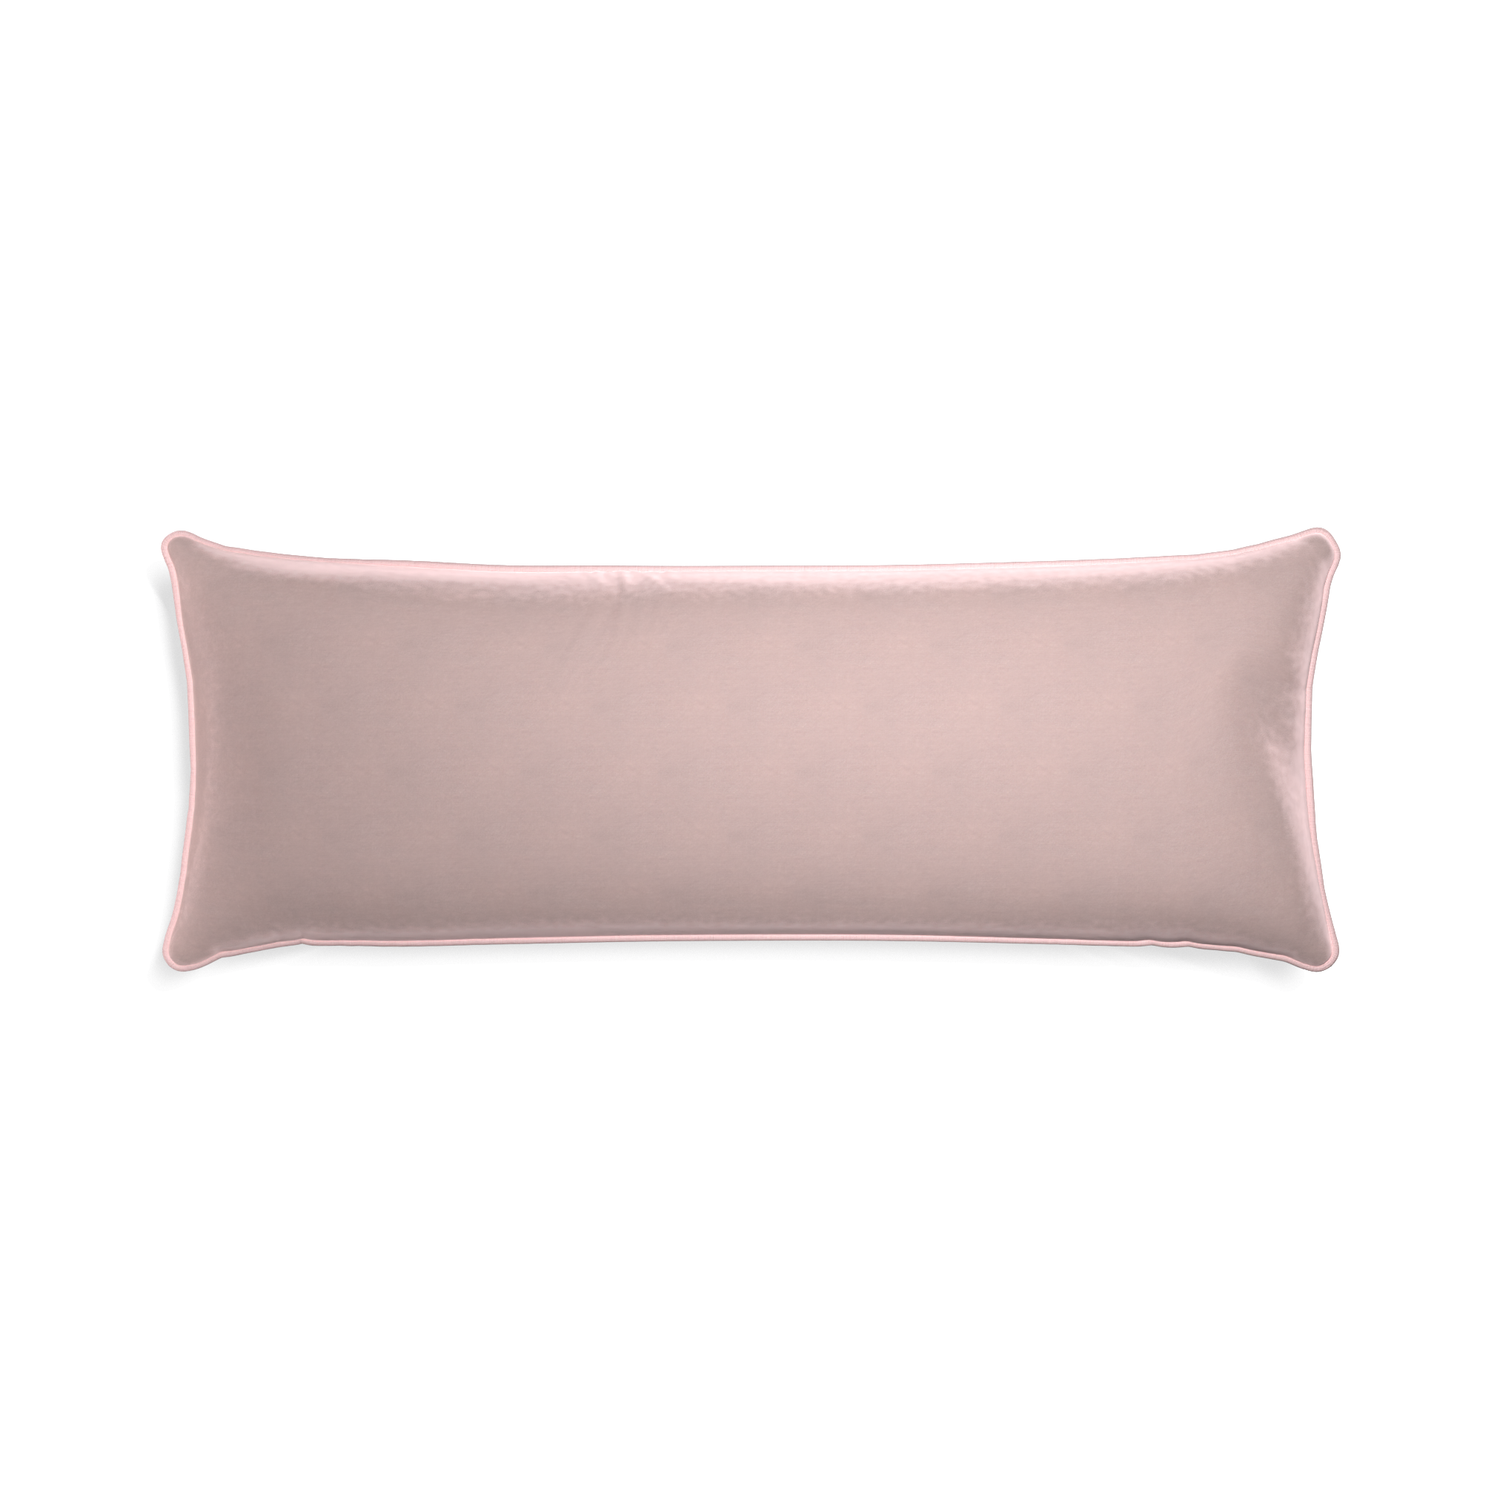 rectangle light pink velvet pillow with light pink piping